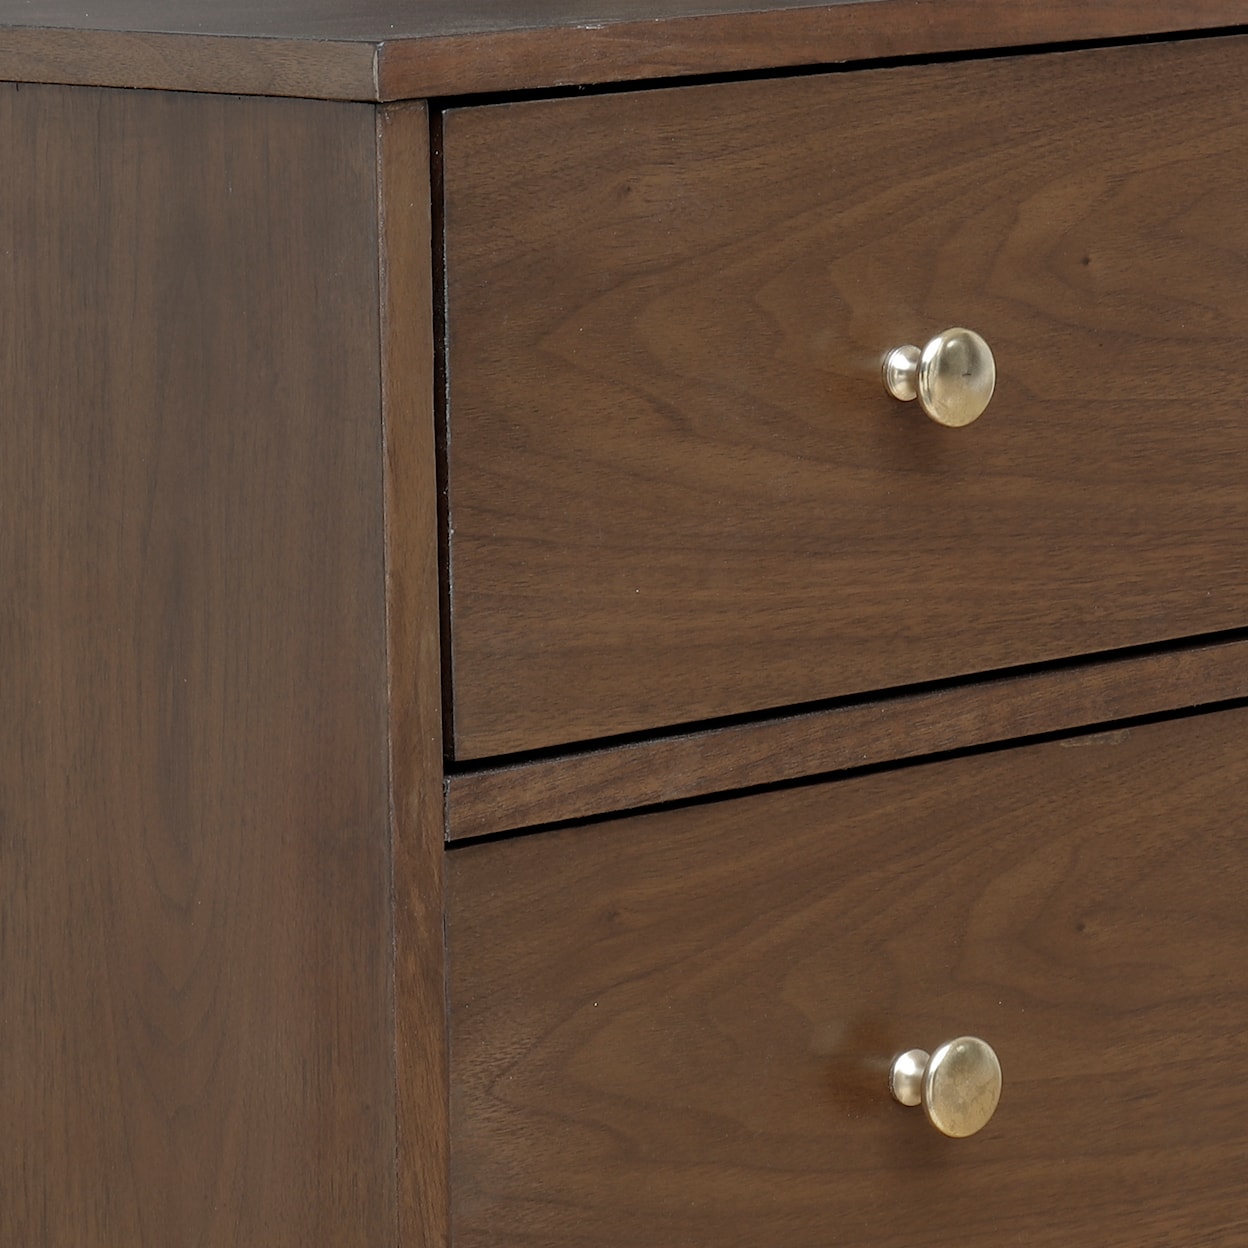 Accentrics Home Accents Three Drawer Chest in Walnut 